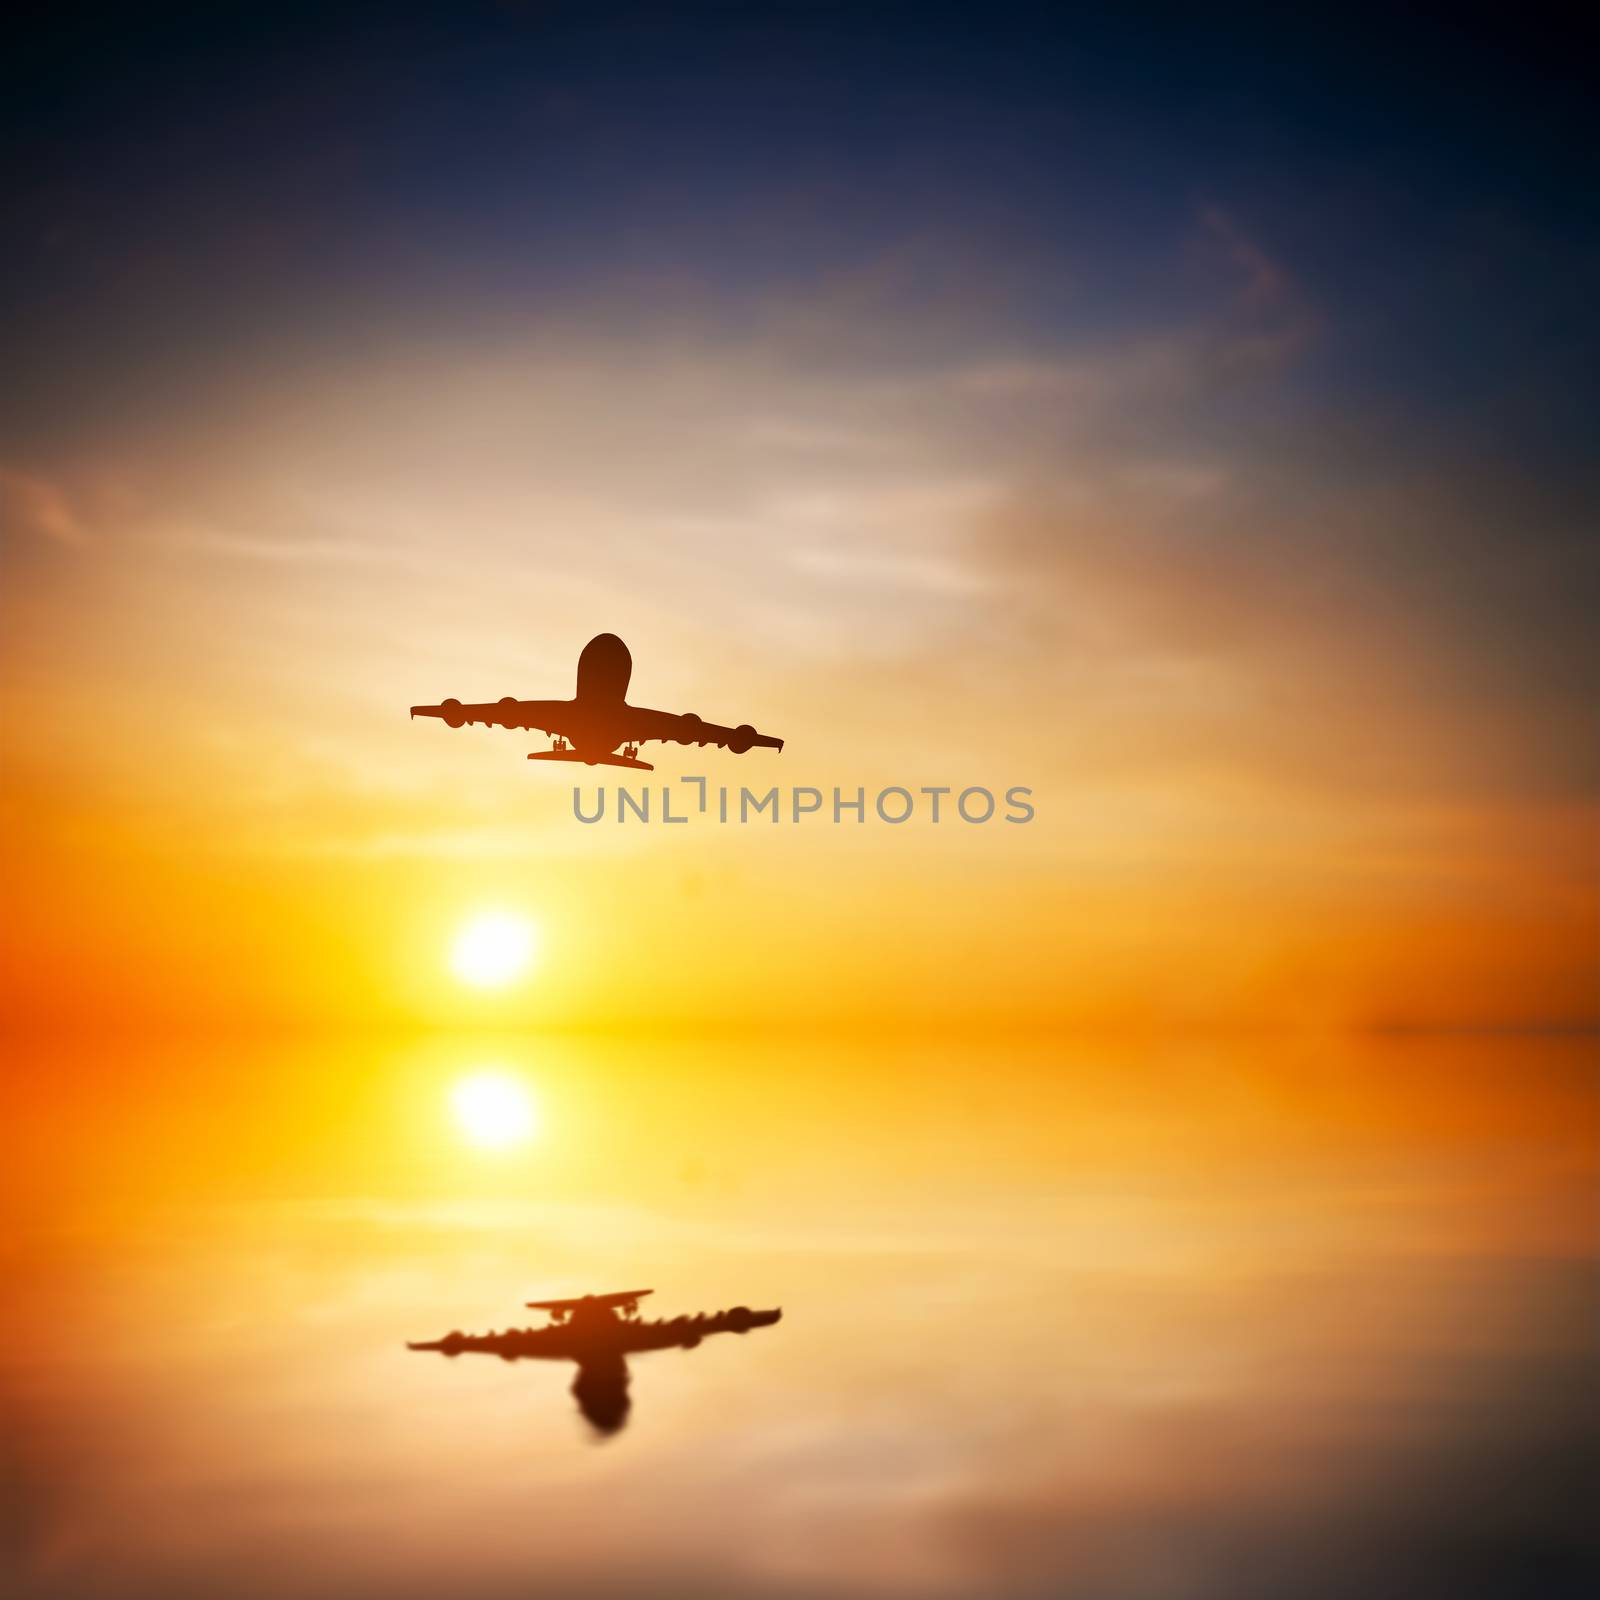 Airplane taking off at sunset. Silhouette of a passenger or carg by photocreo